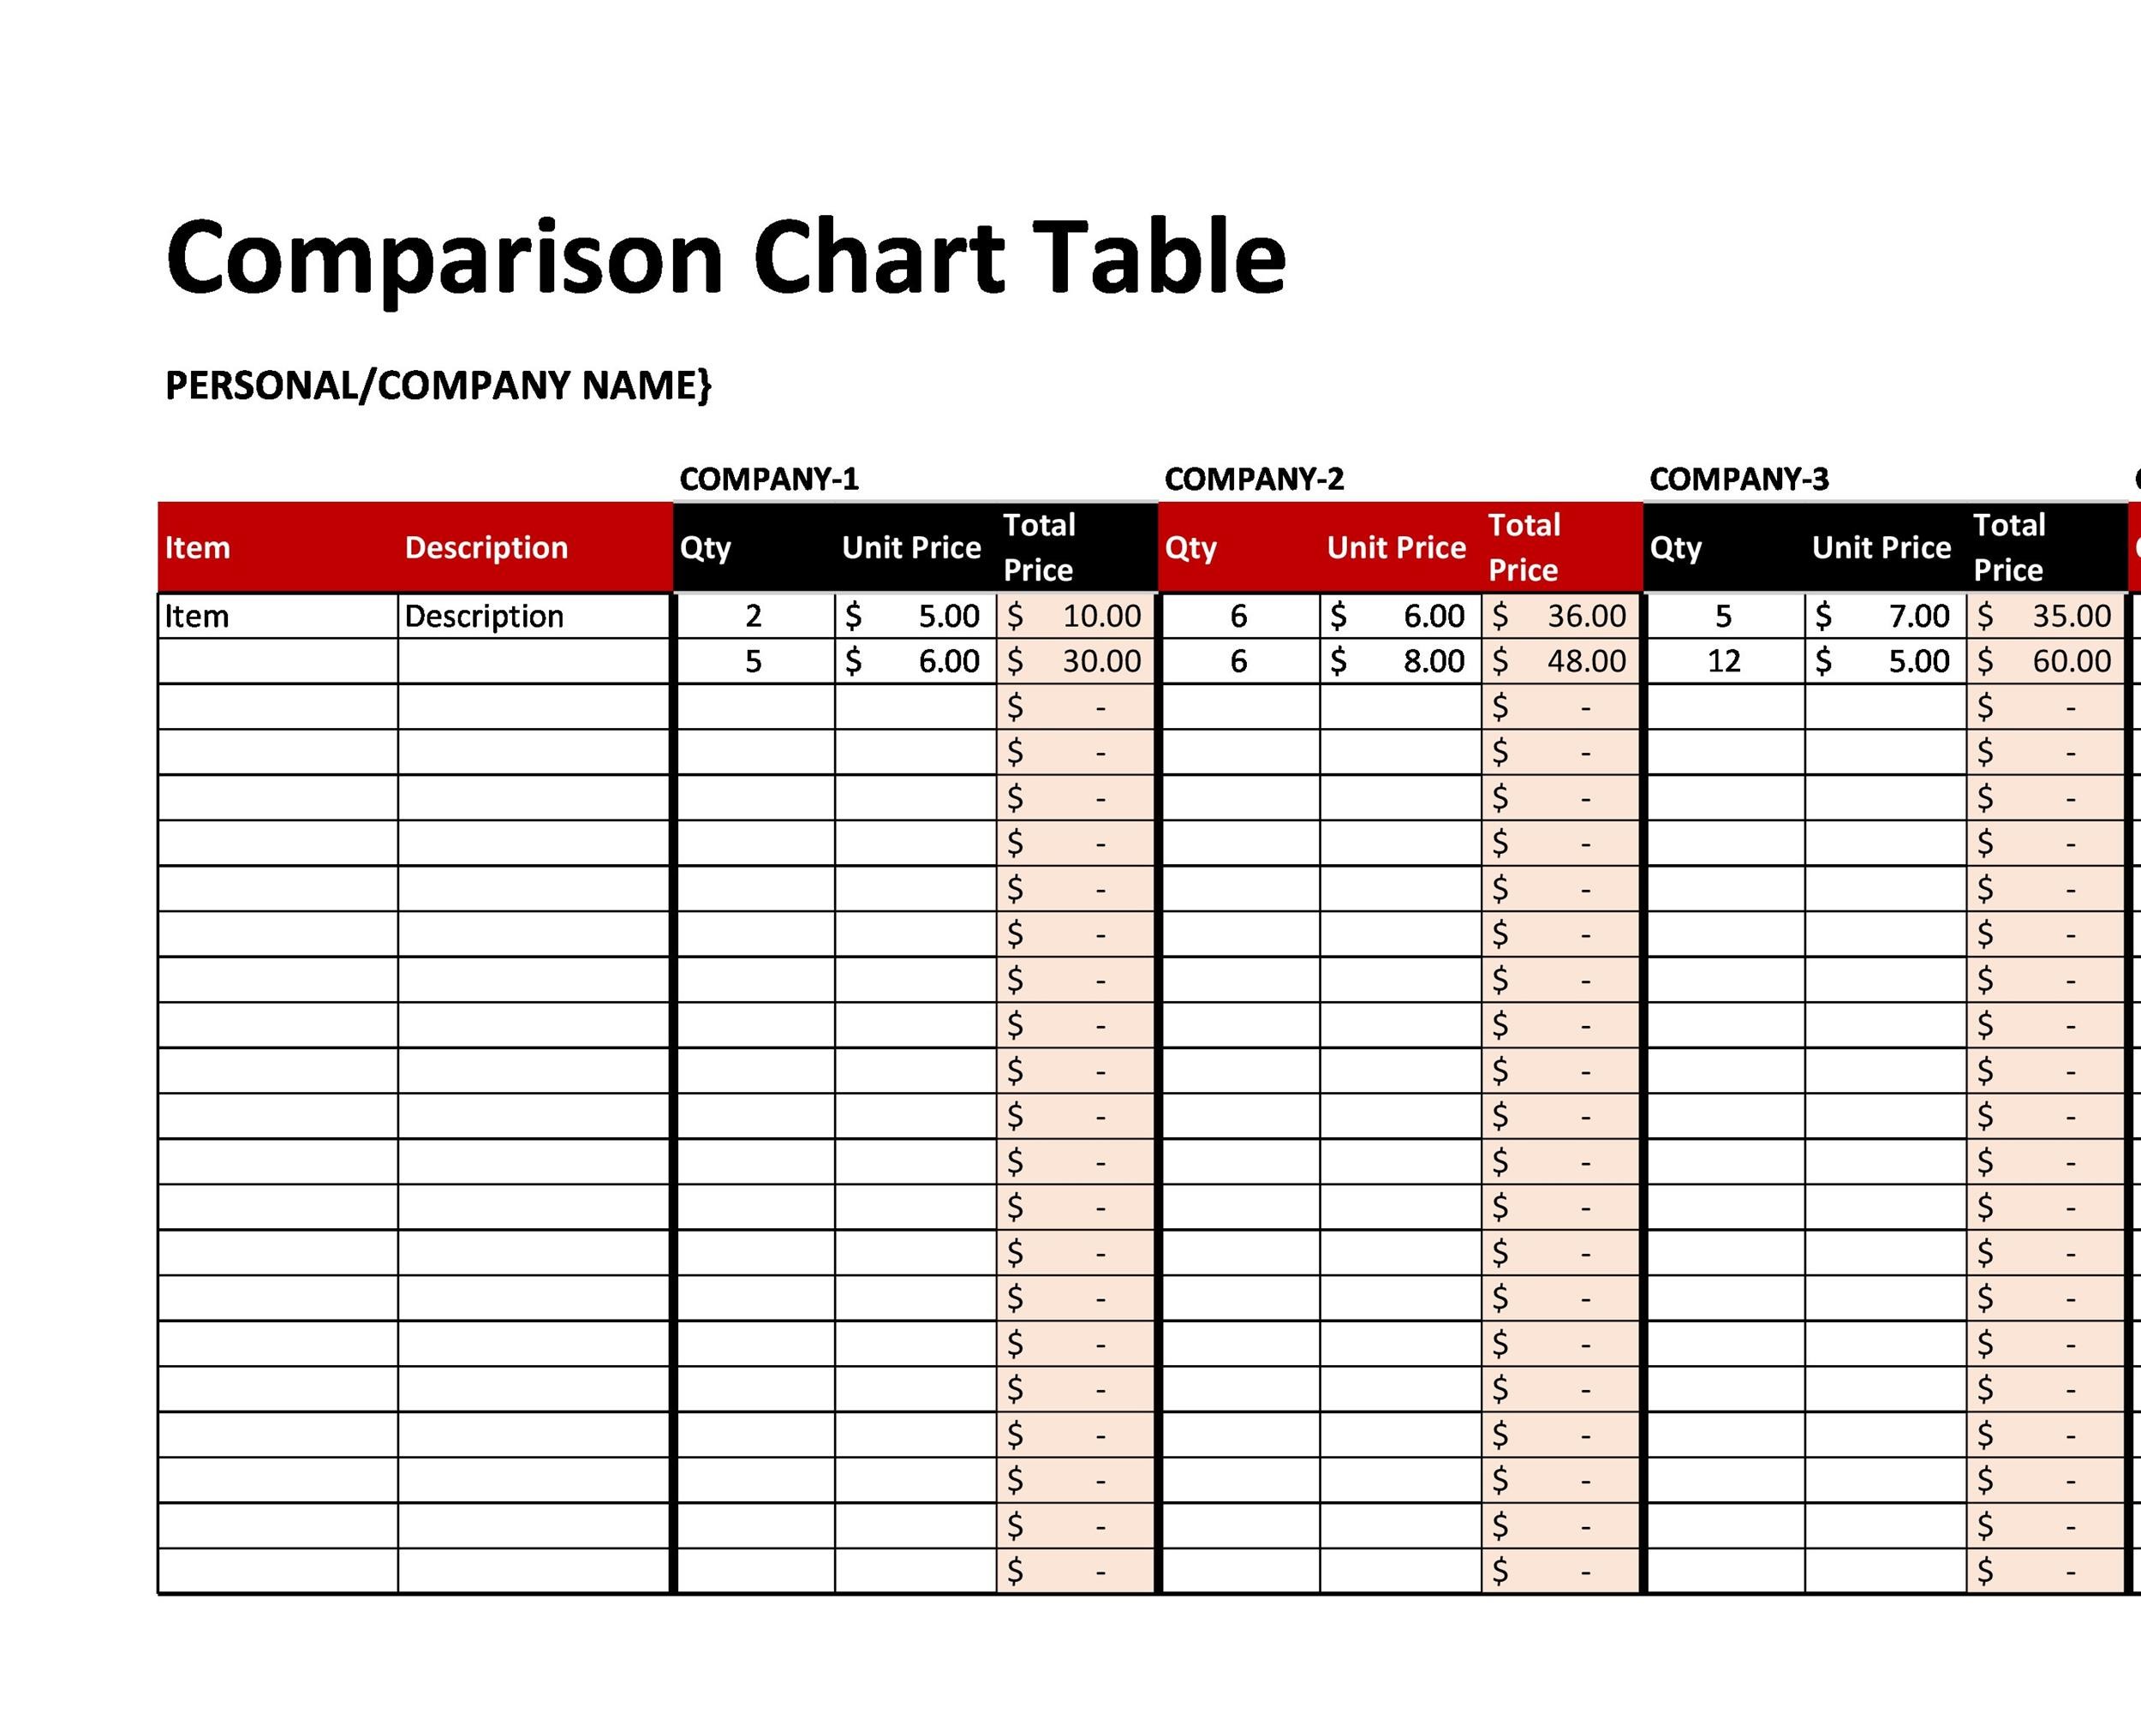 40 Great Comparison Chart Templates for ANY Situation ᐅ TemplateLab